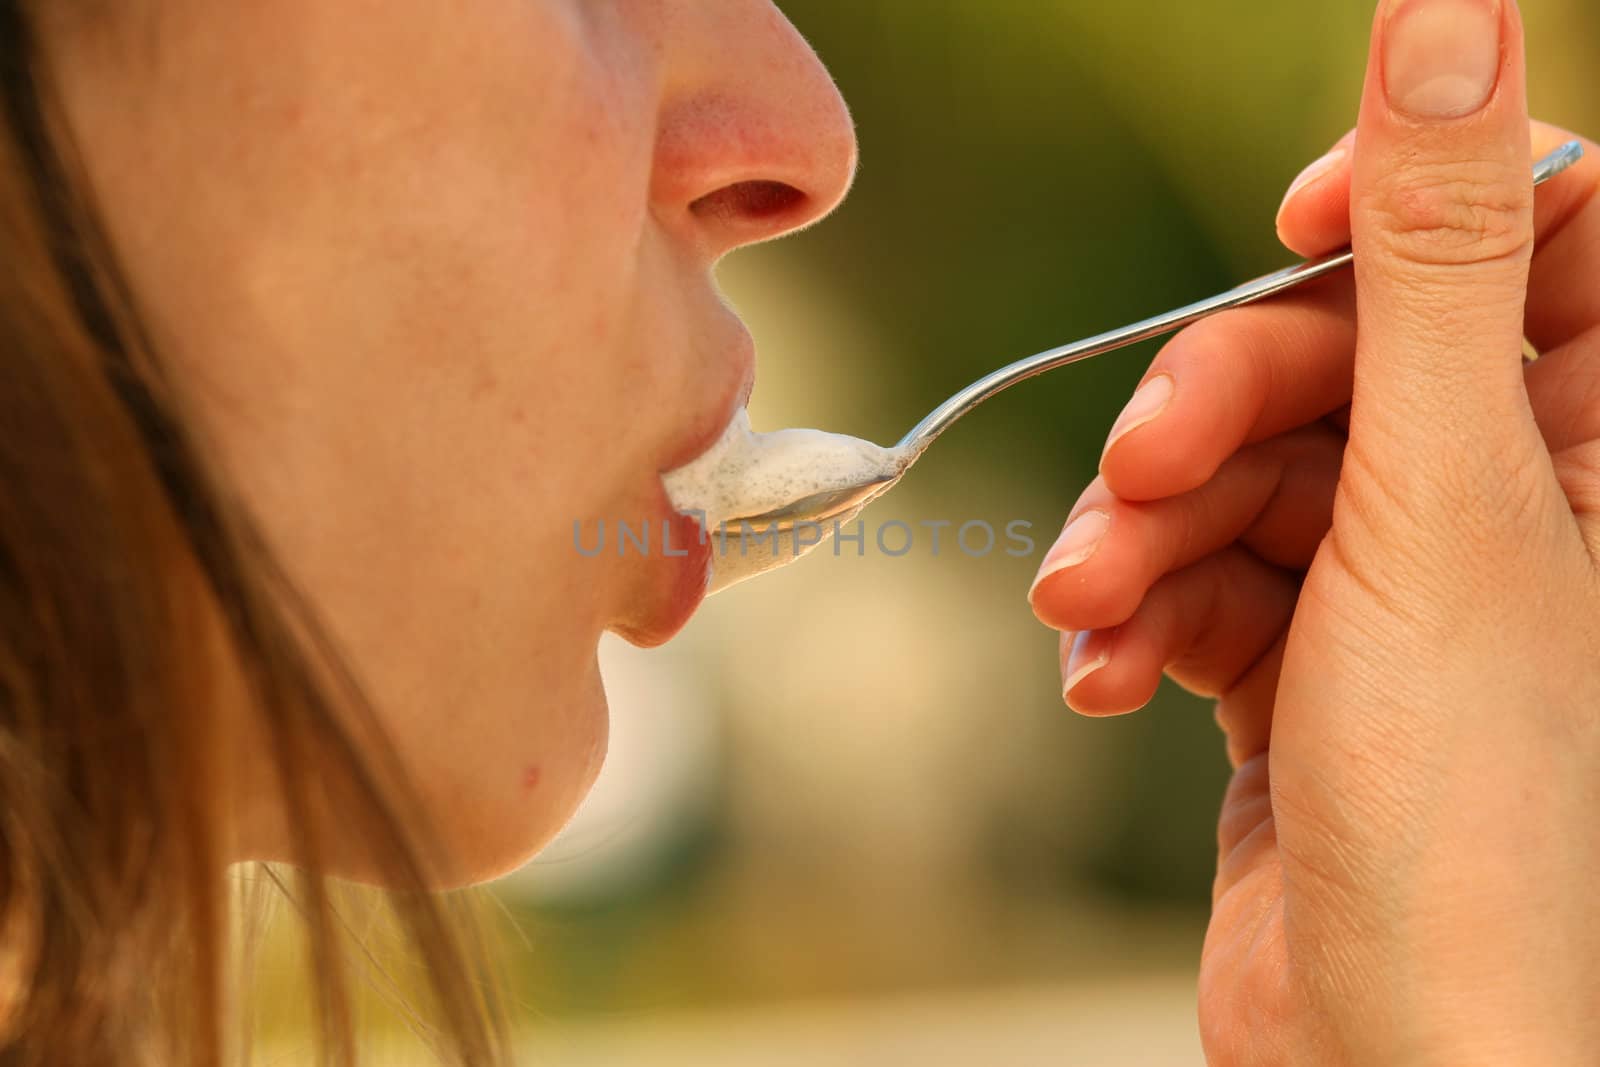 Girl holding a spoon with foam cappuchino